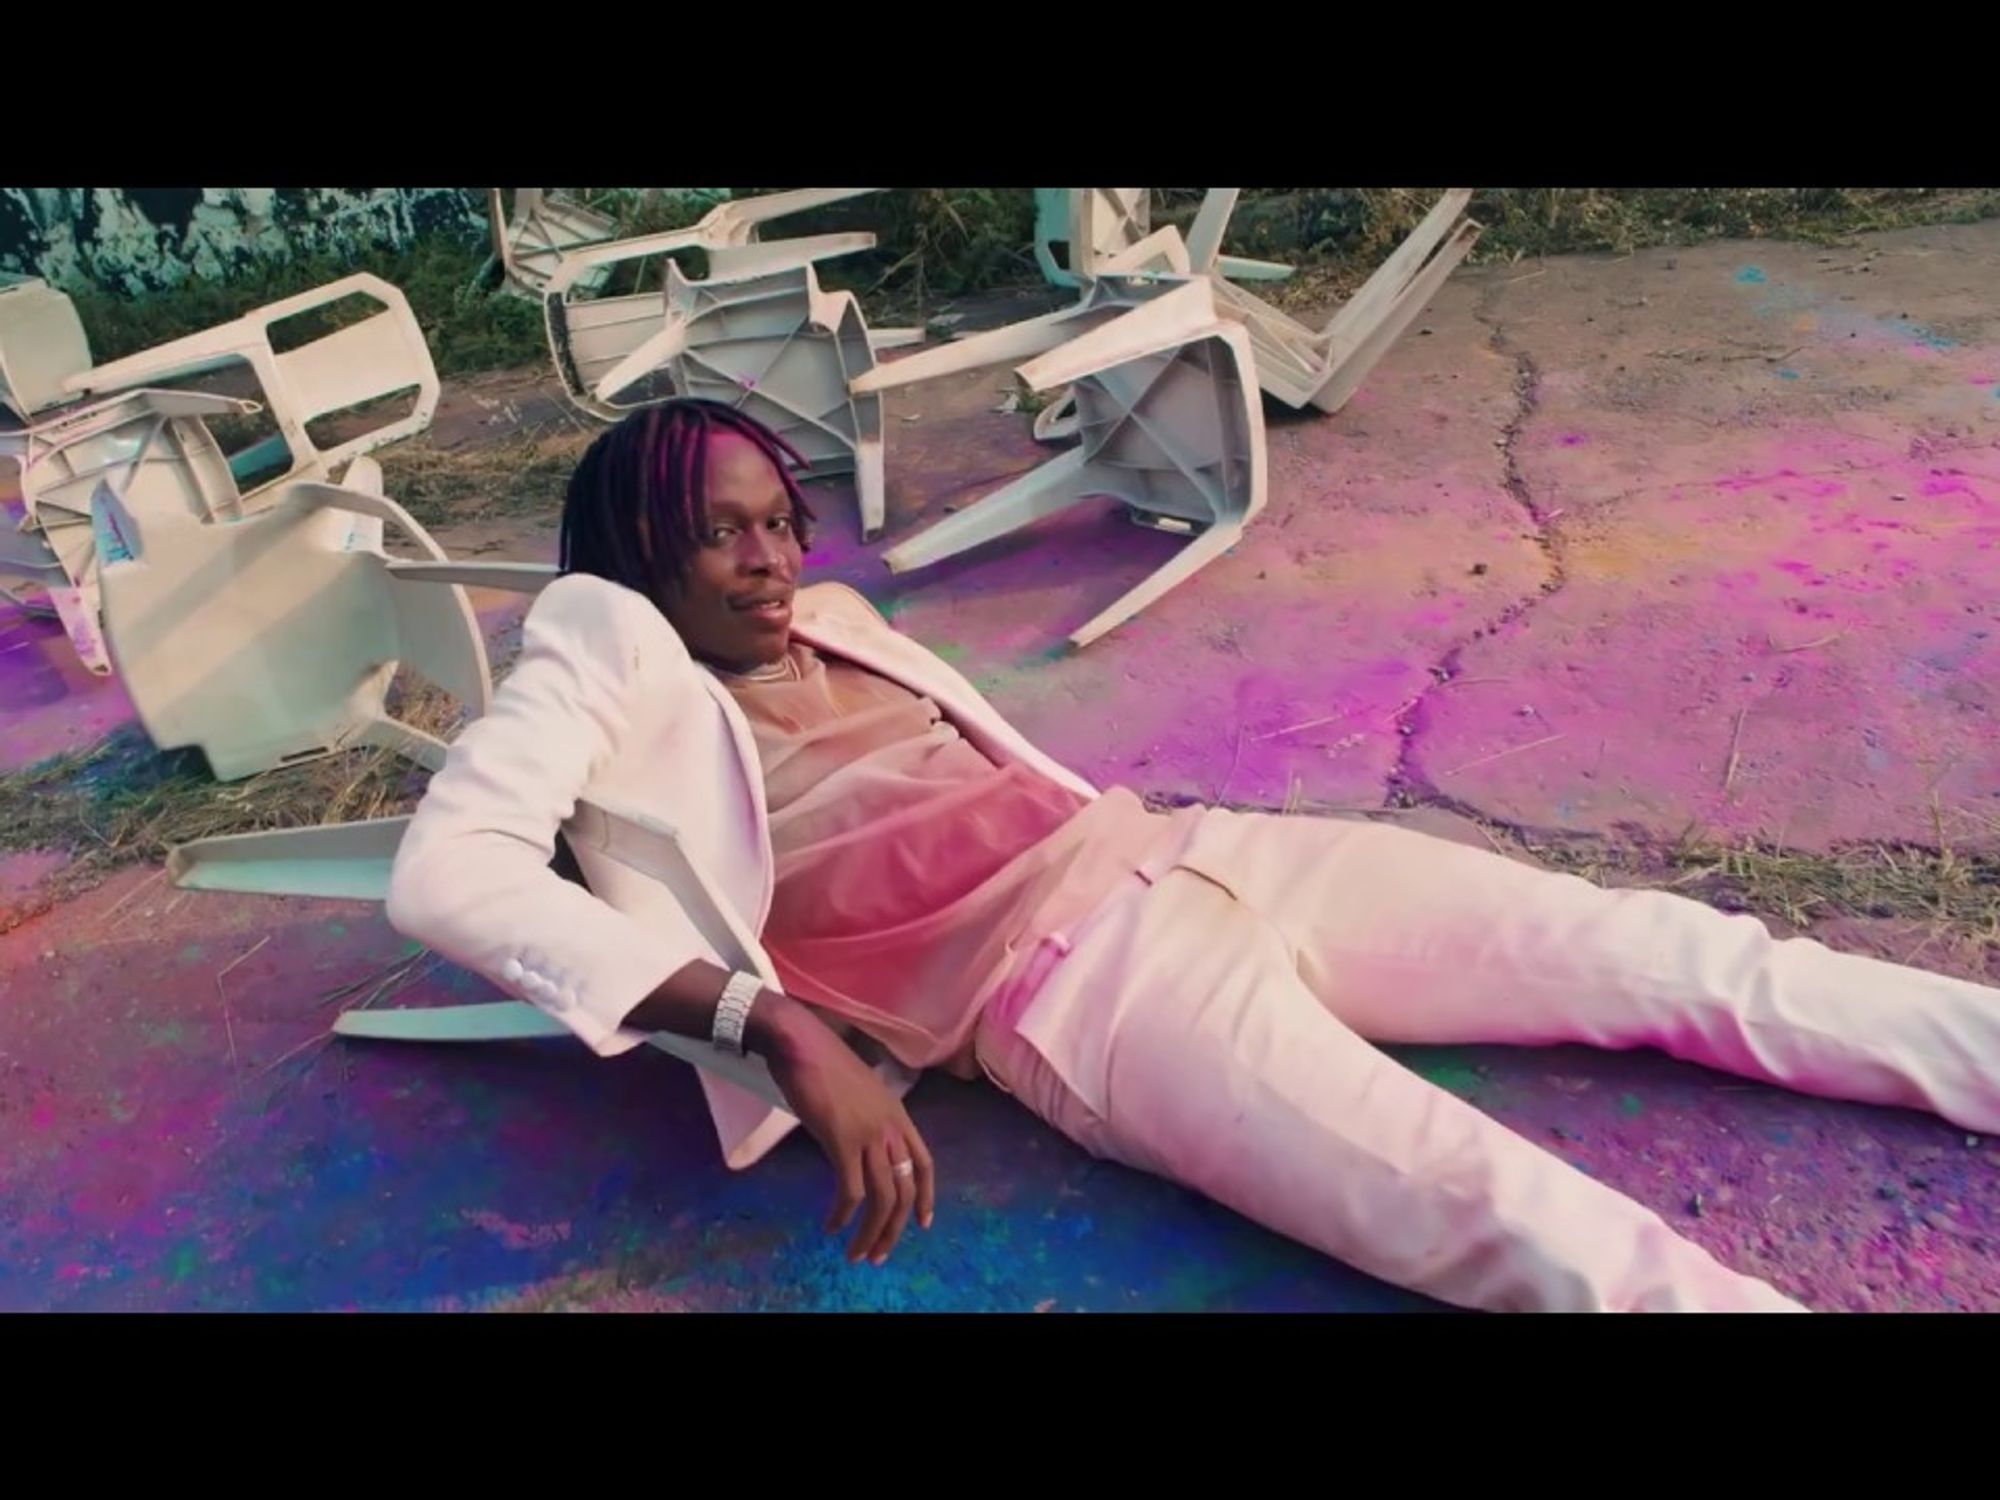 Watch Fireboy DML's New Music Video for 'Vibration'